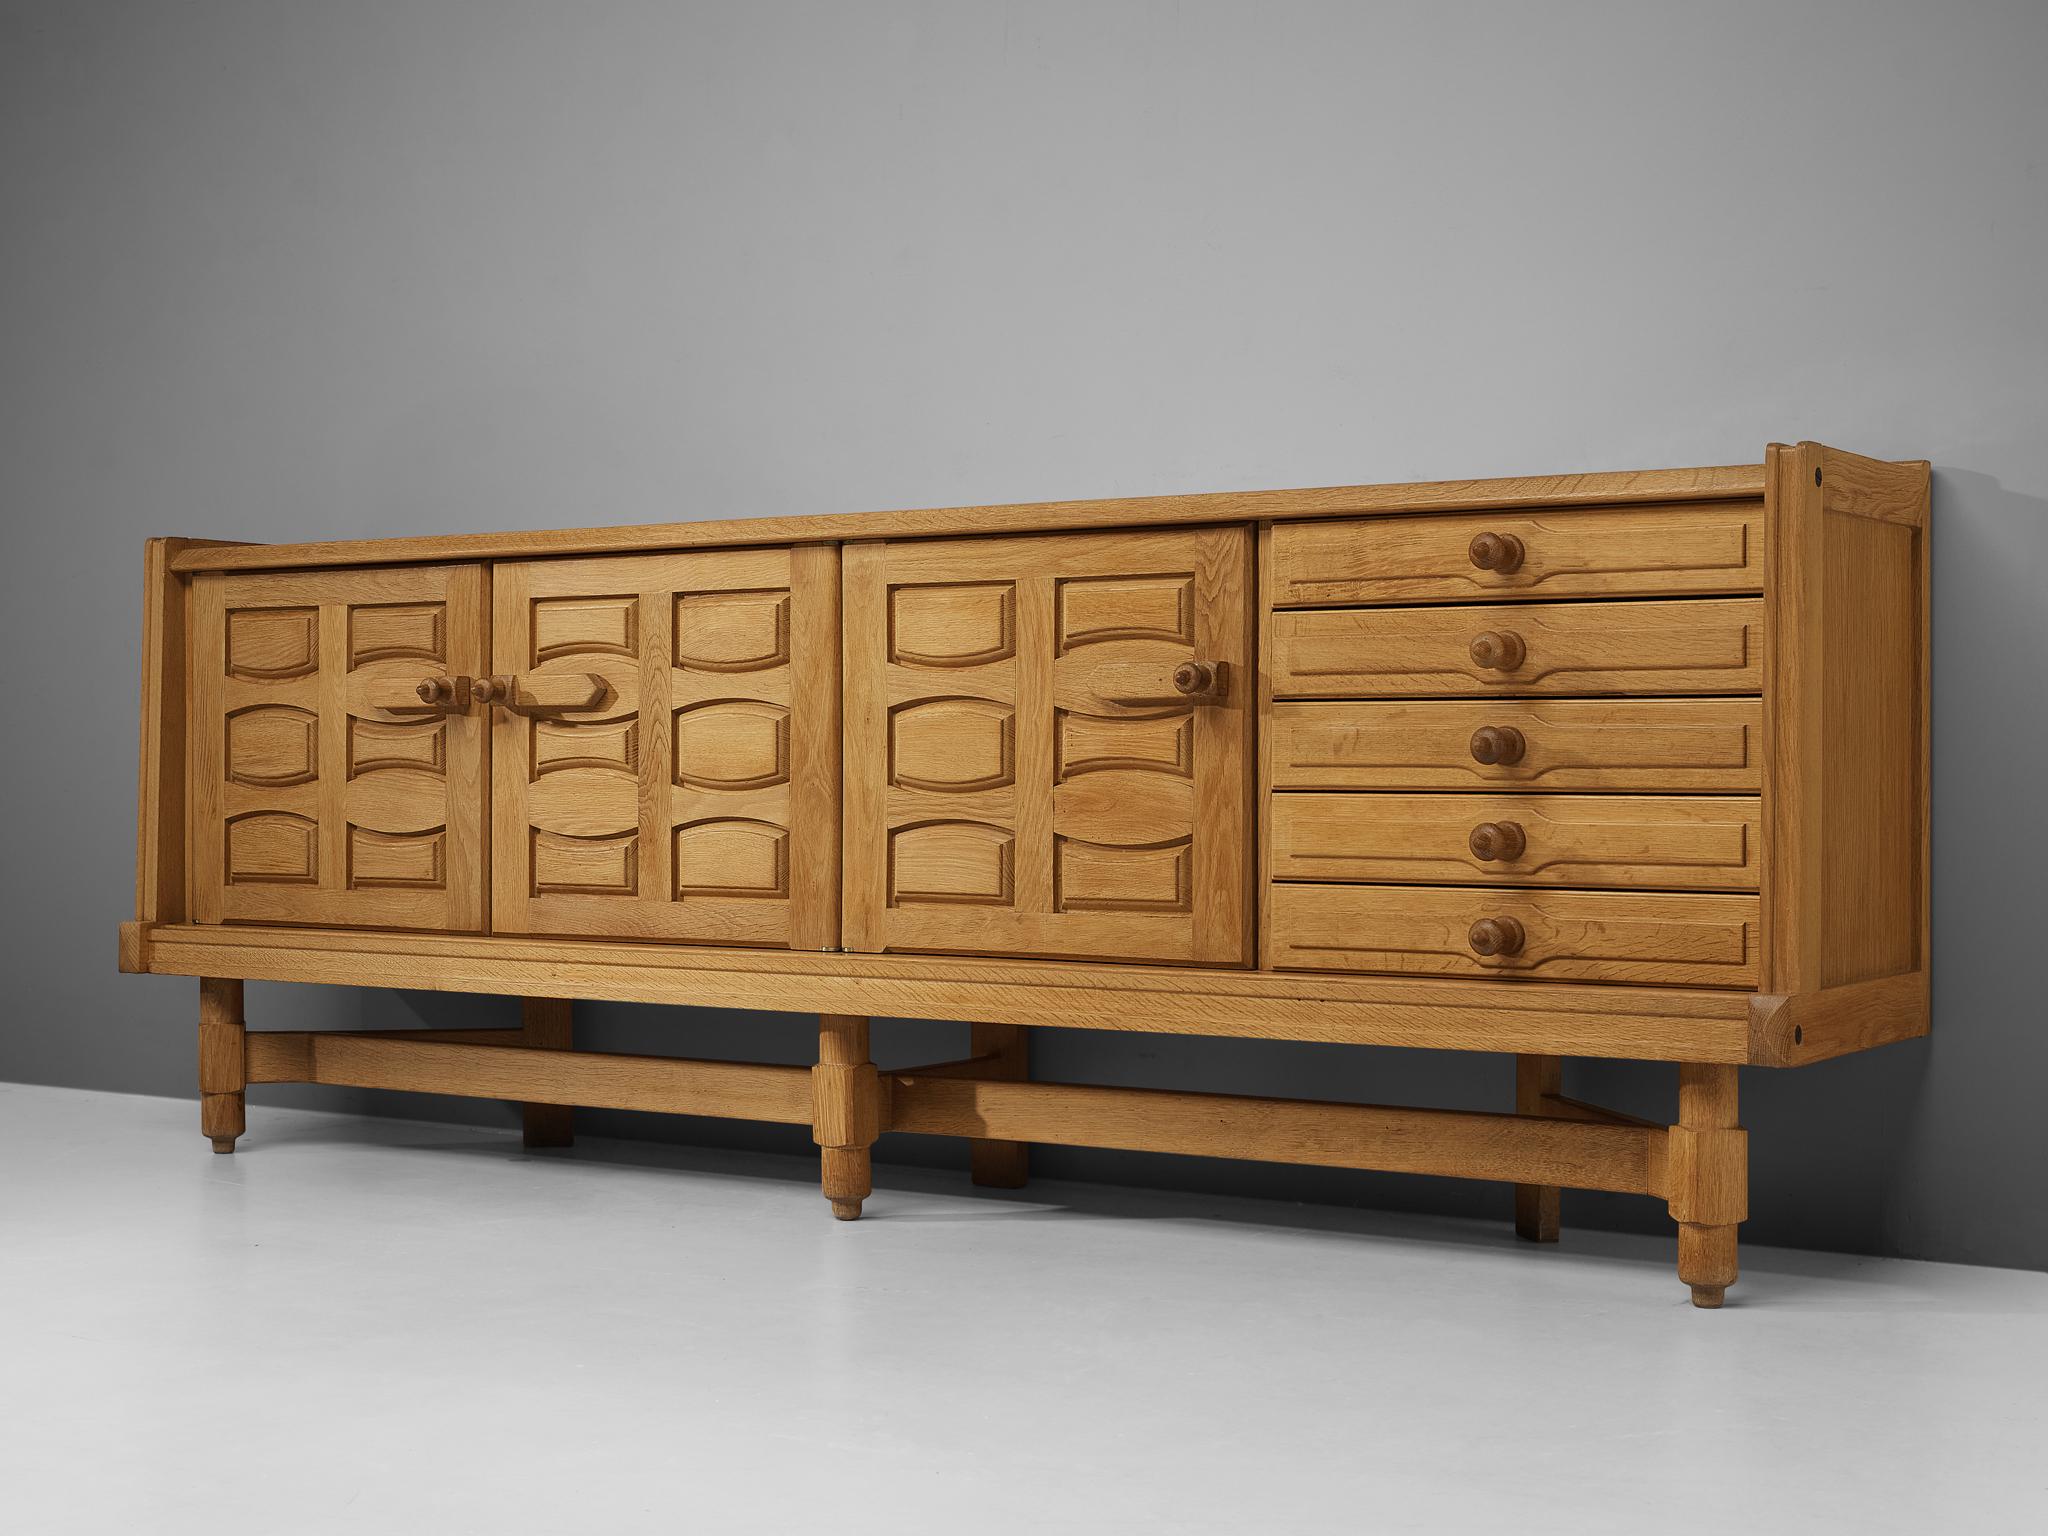 Mid-20th Century Guillerme & Chambron Sideboard in Solid Oak with Ceramic Tiles